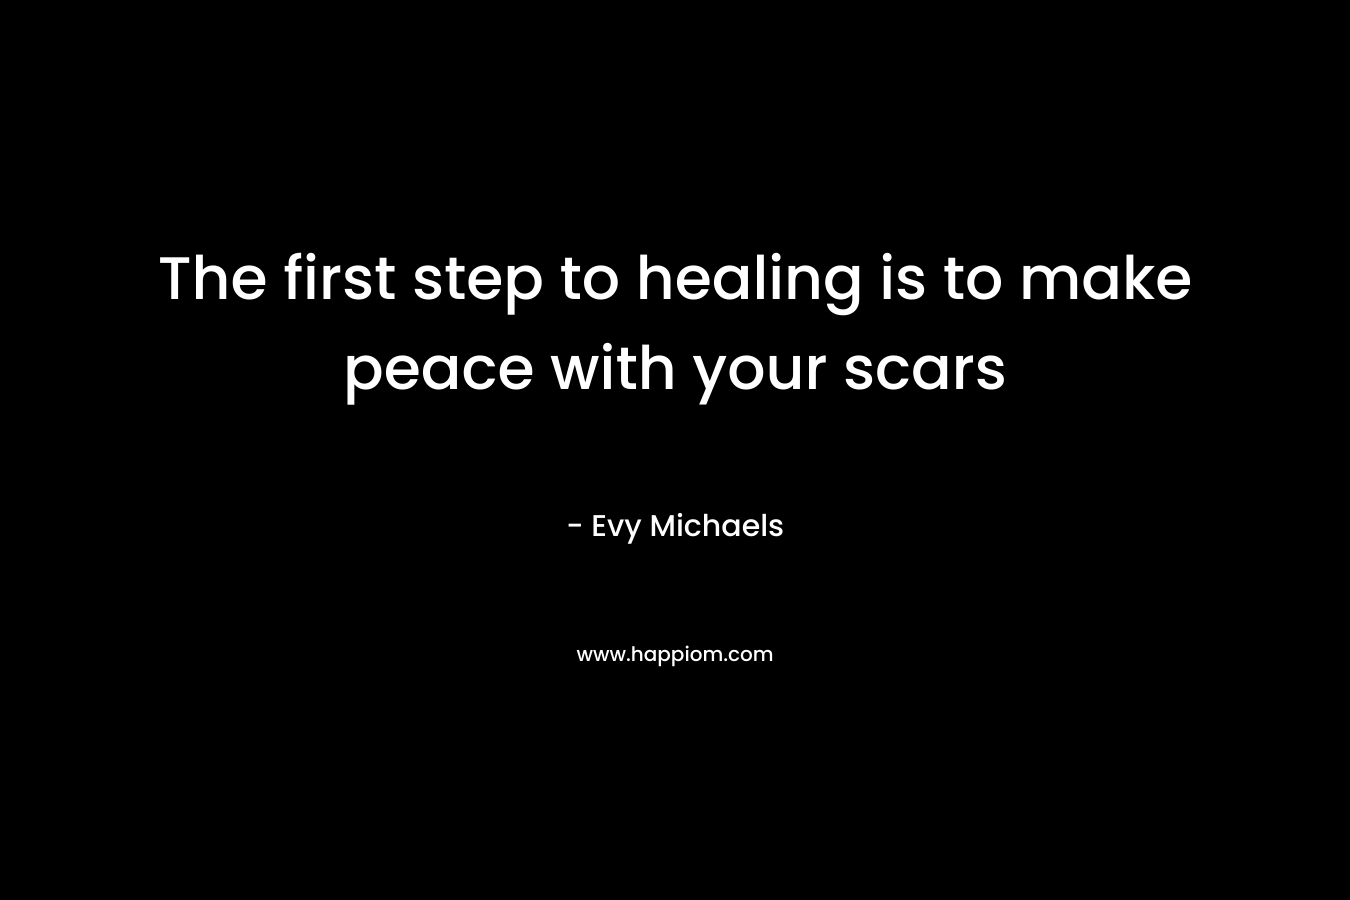 The first step to healing is to make peace with your scars